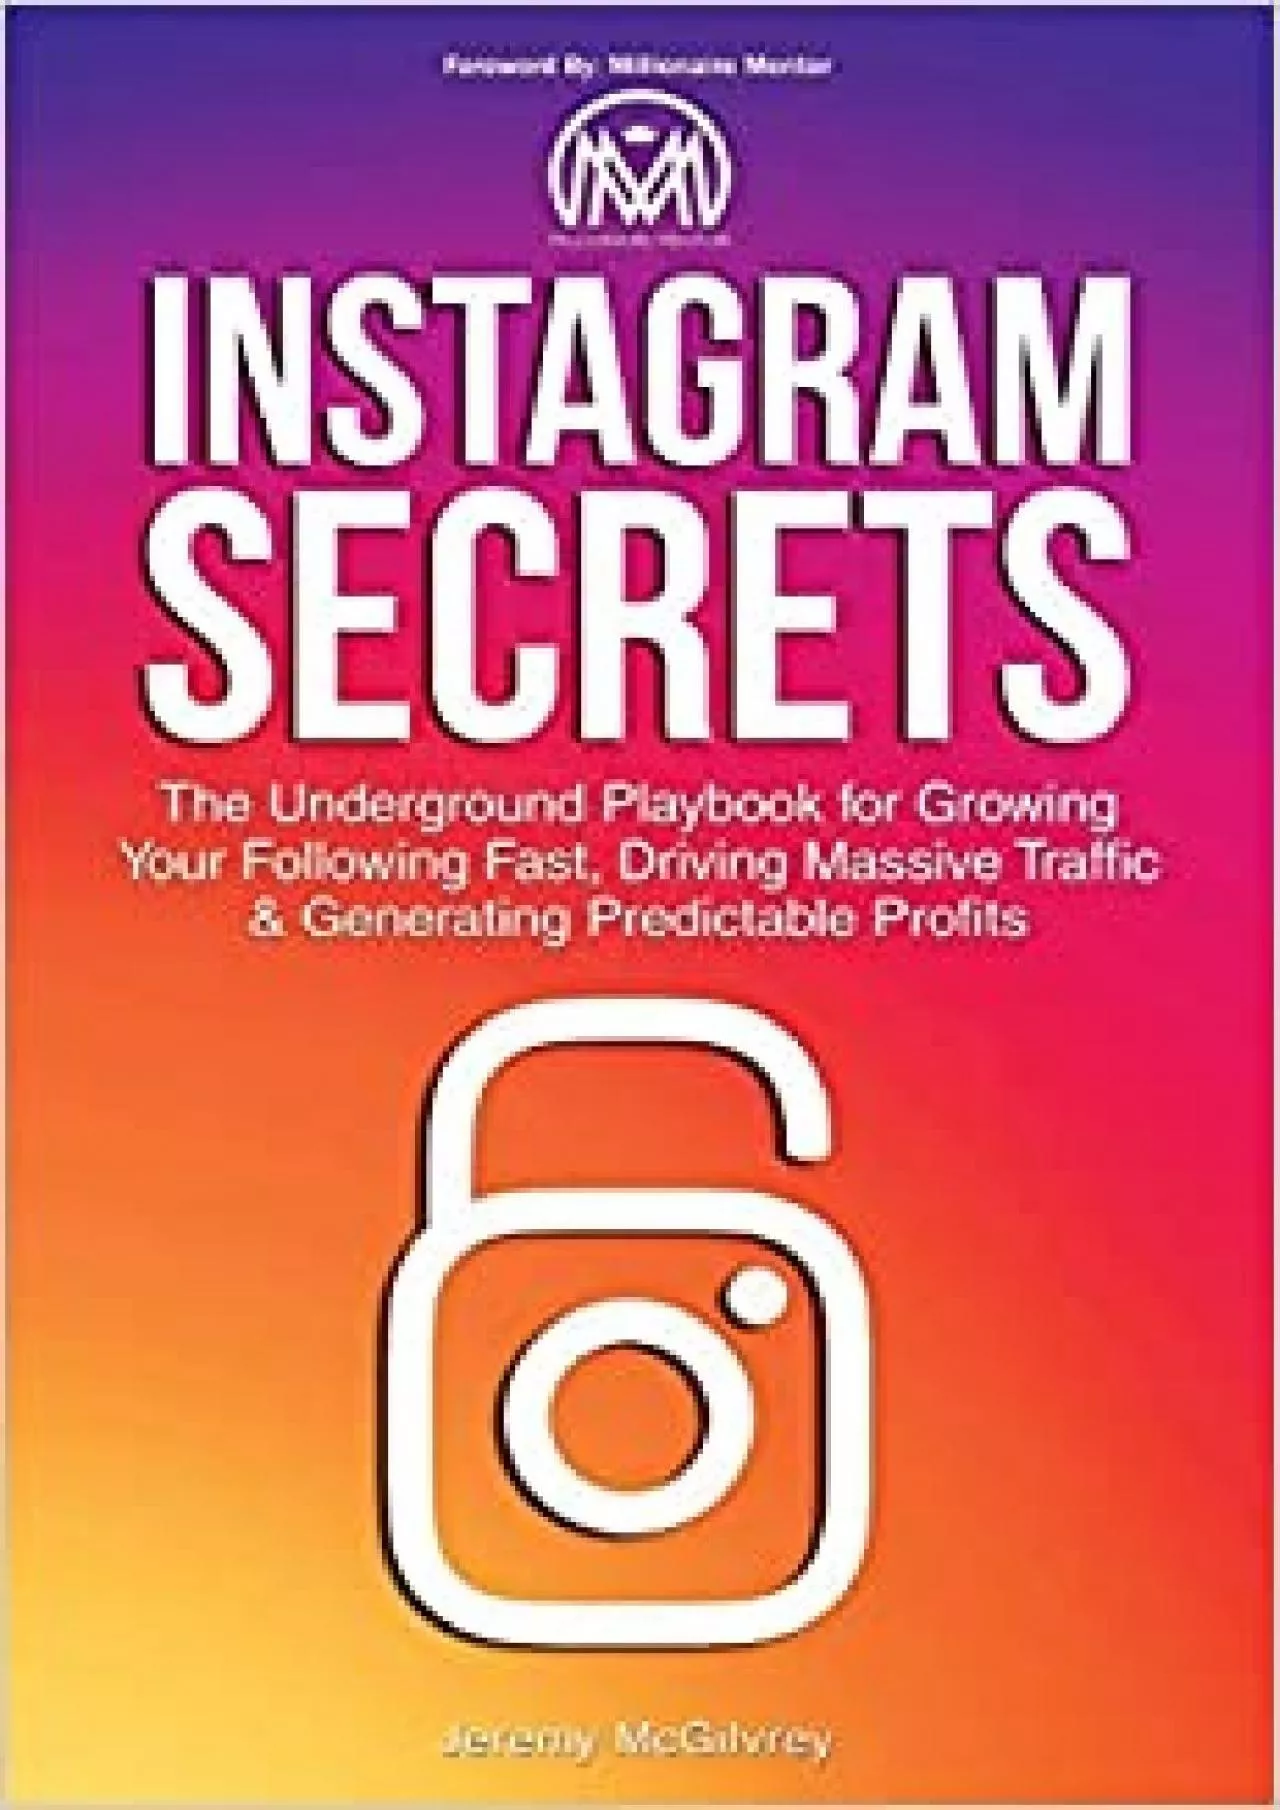 Instagram Secrets The Underground Playbook for Growing Your Following Fast Driving Massive